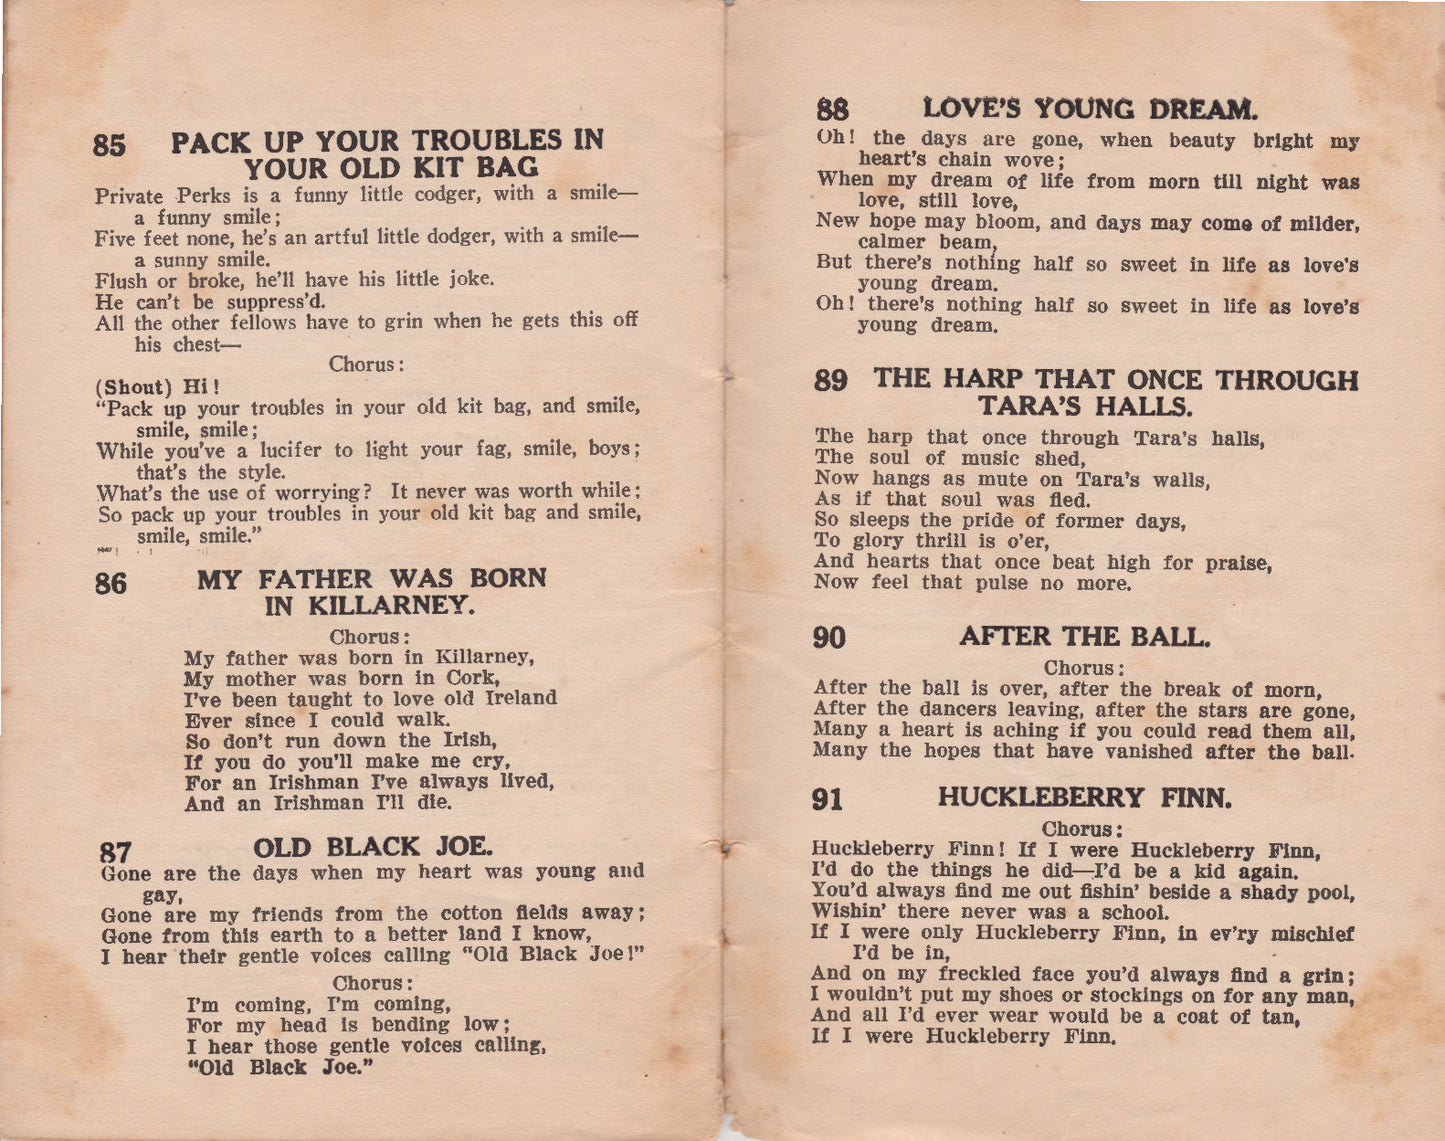 Songster Book - Unidentified With Wartime Songs